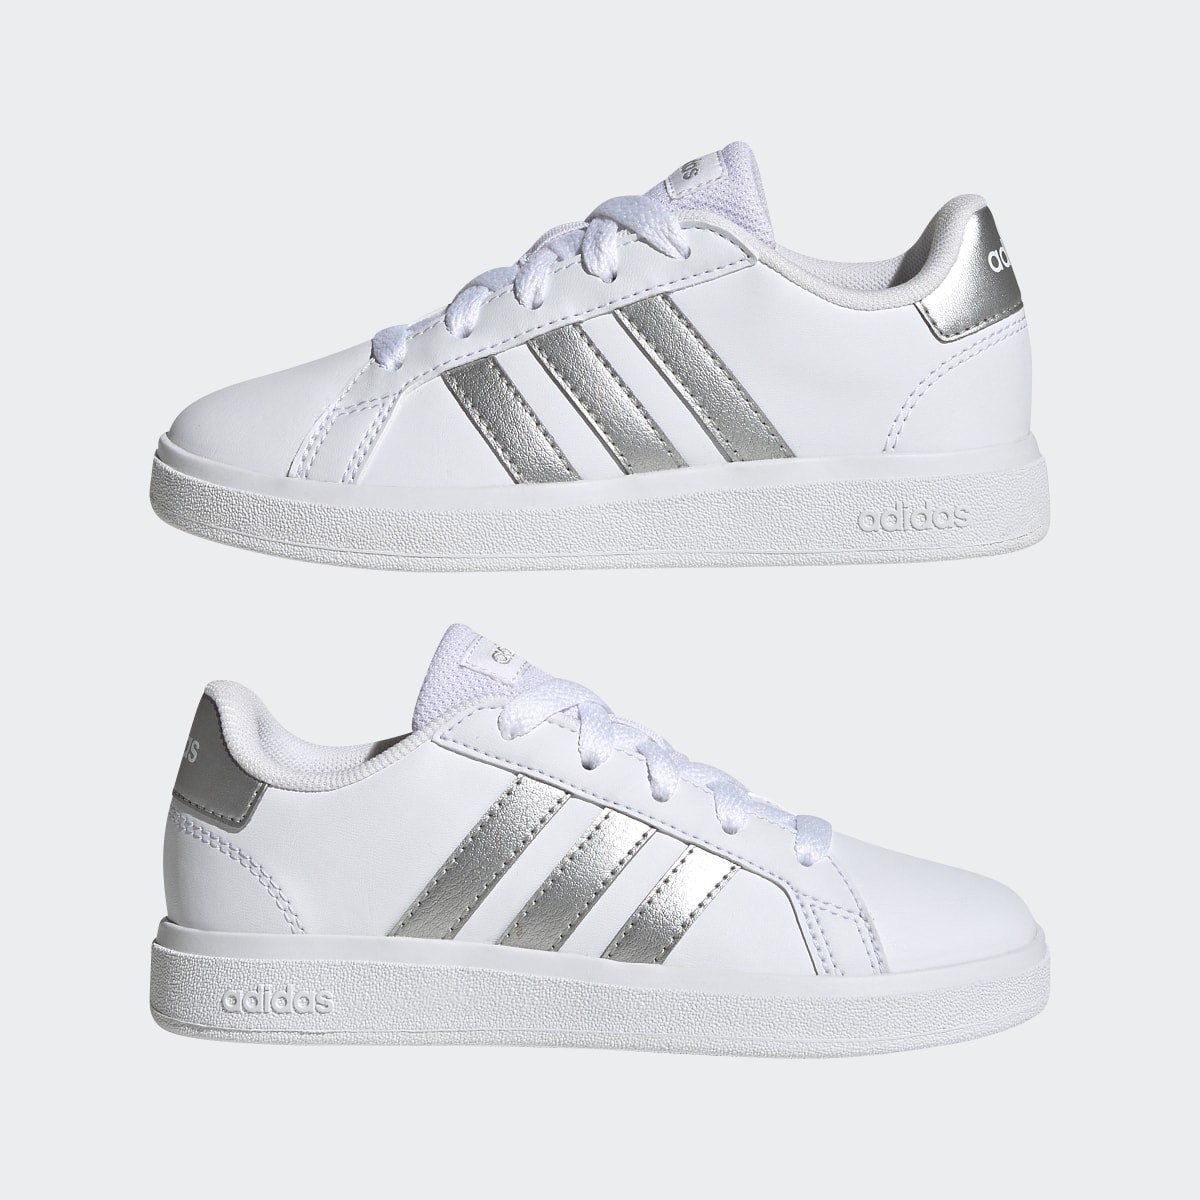 Adidas Grand Court Lifestyle Tennis Lace-Up Schuh. 8